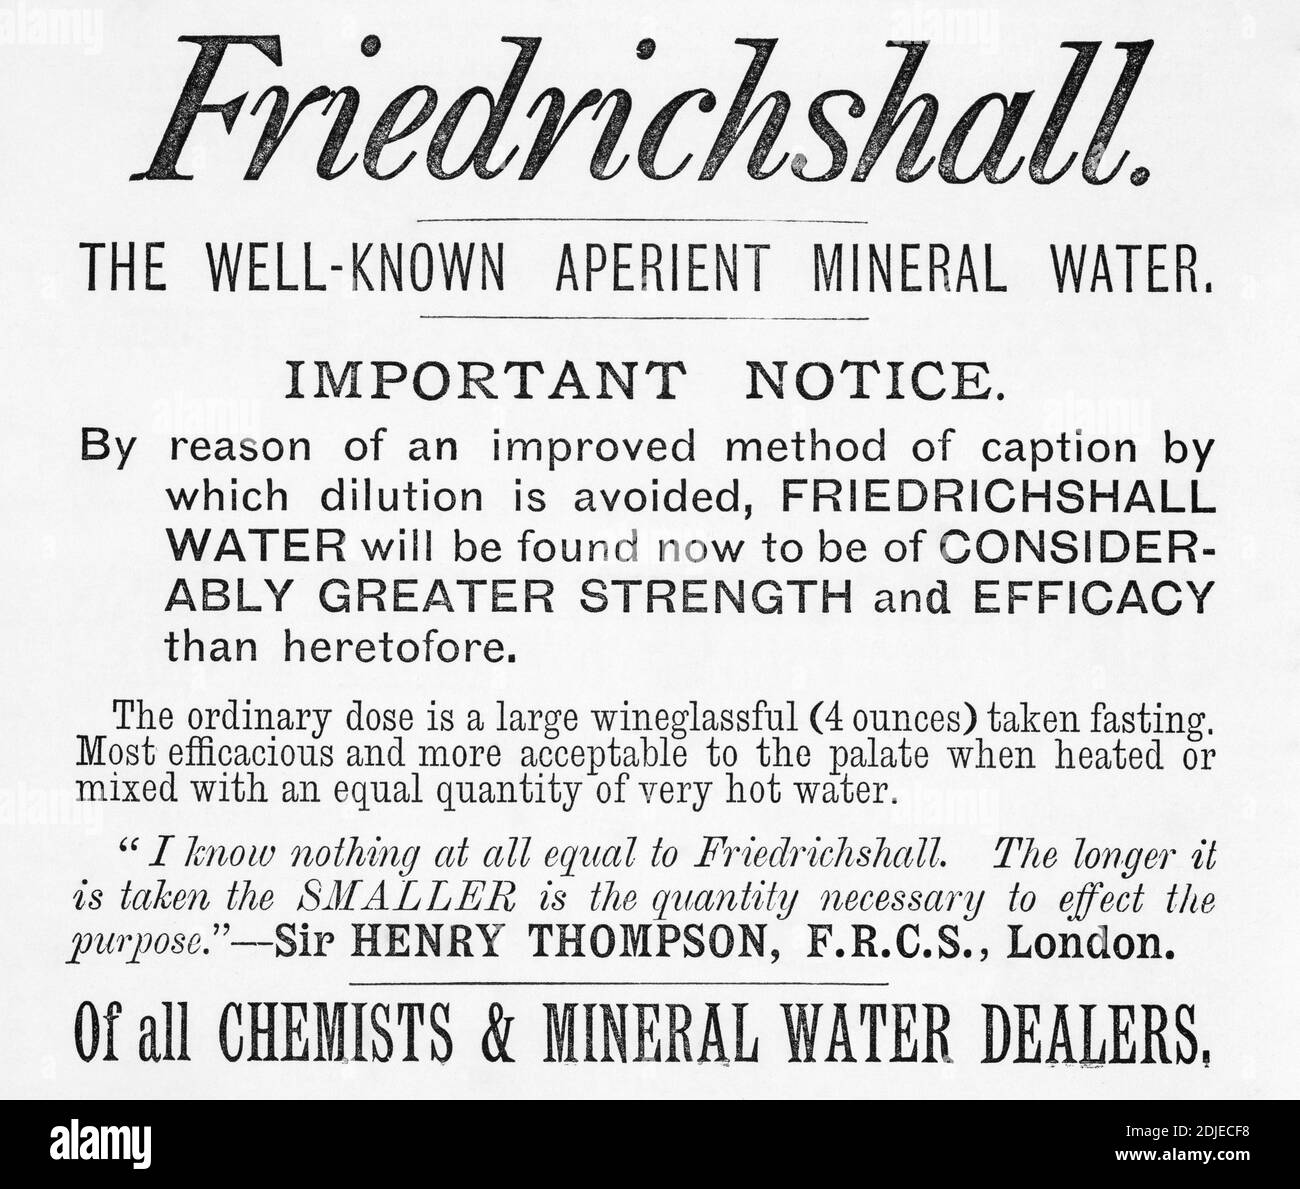 1886 Victorian advert promoting a mineral water as as a health option. Insight into water quality & health issues in domestic households of old times Stock Photo